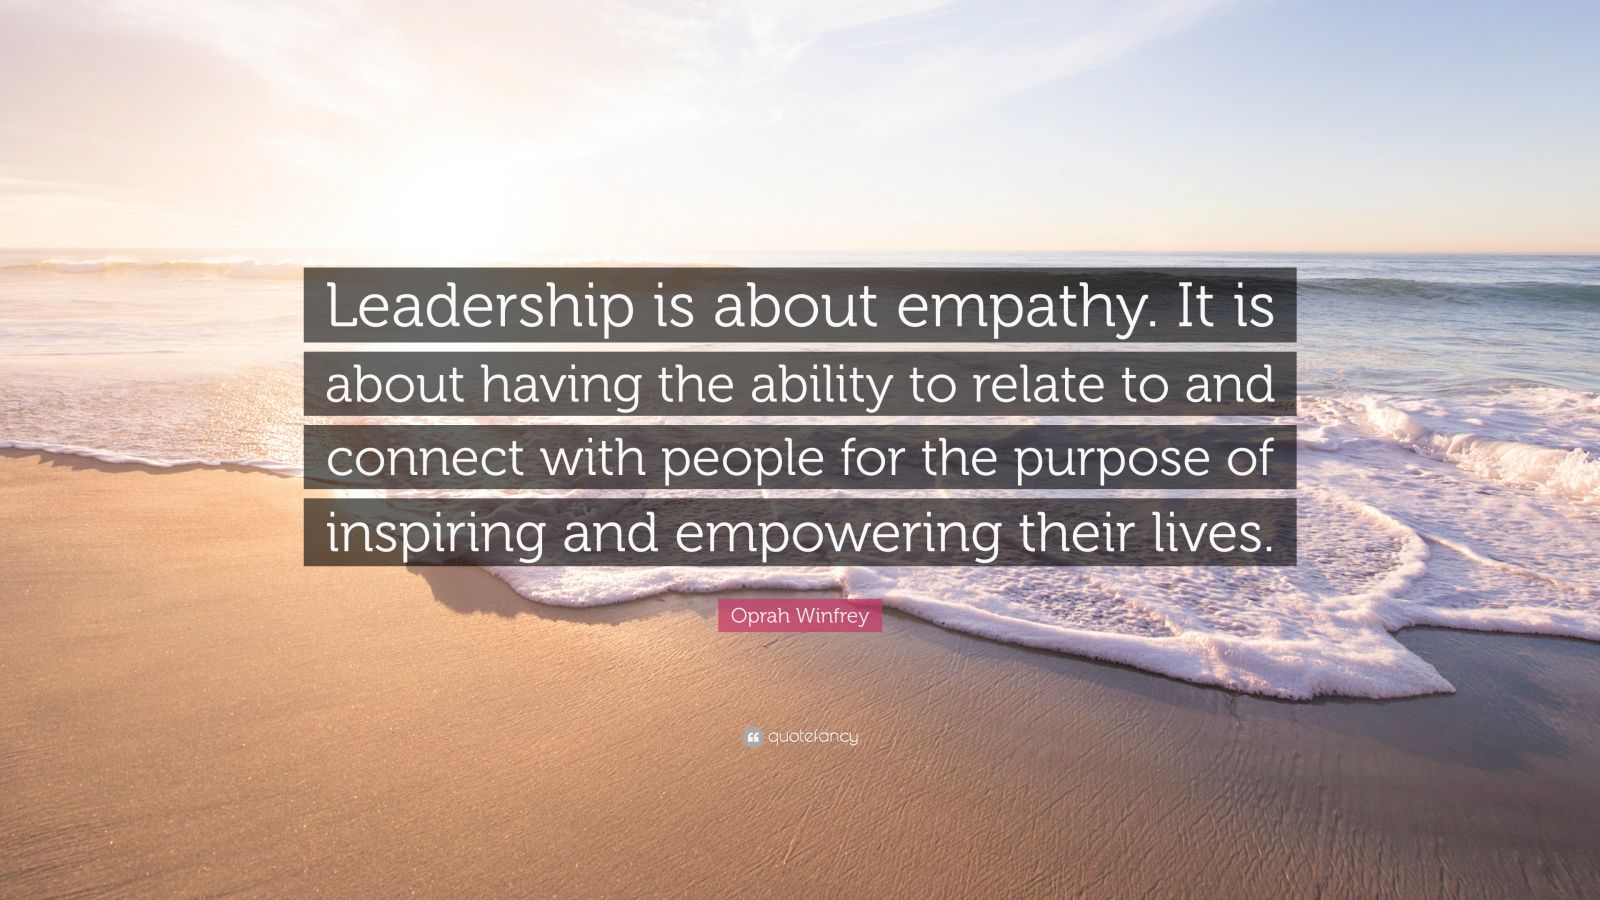 Oprah Winfrey Quote: “Leadership is about empathy. It is about having